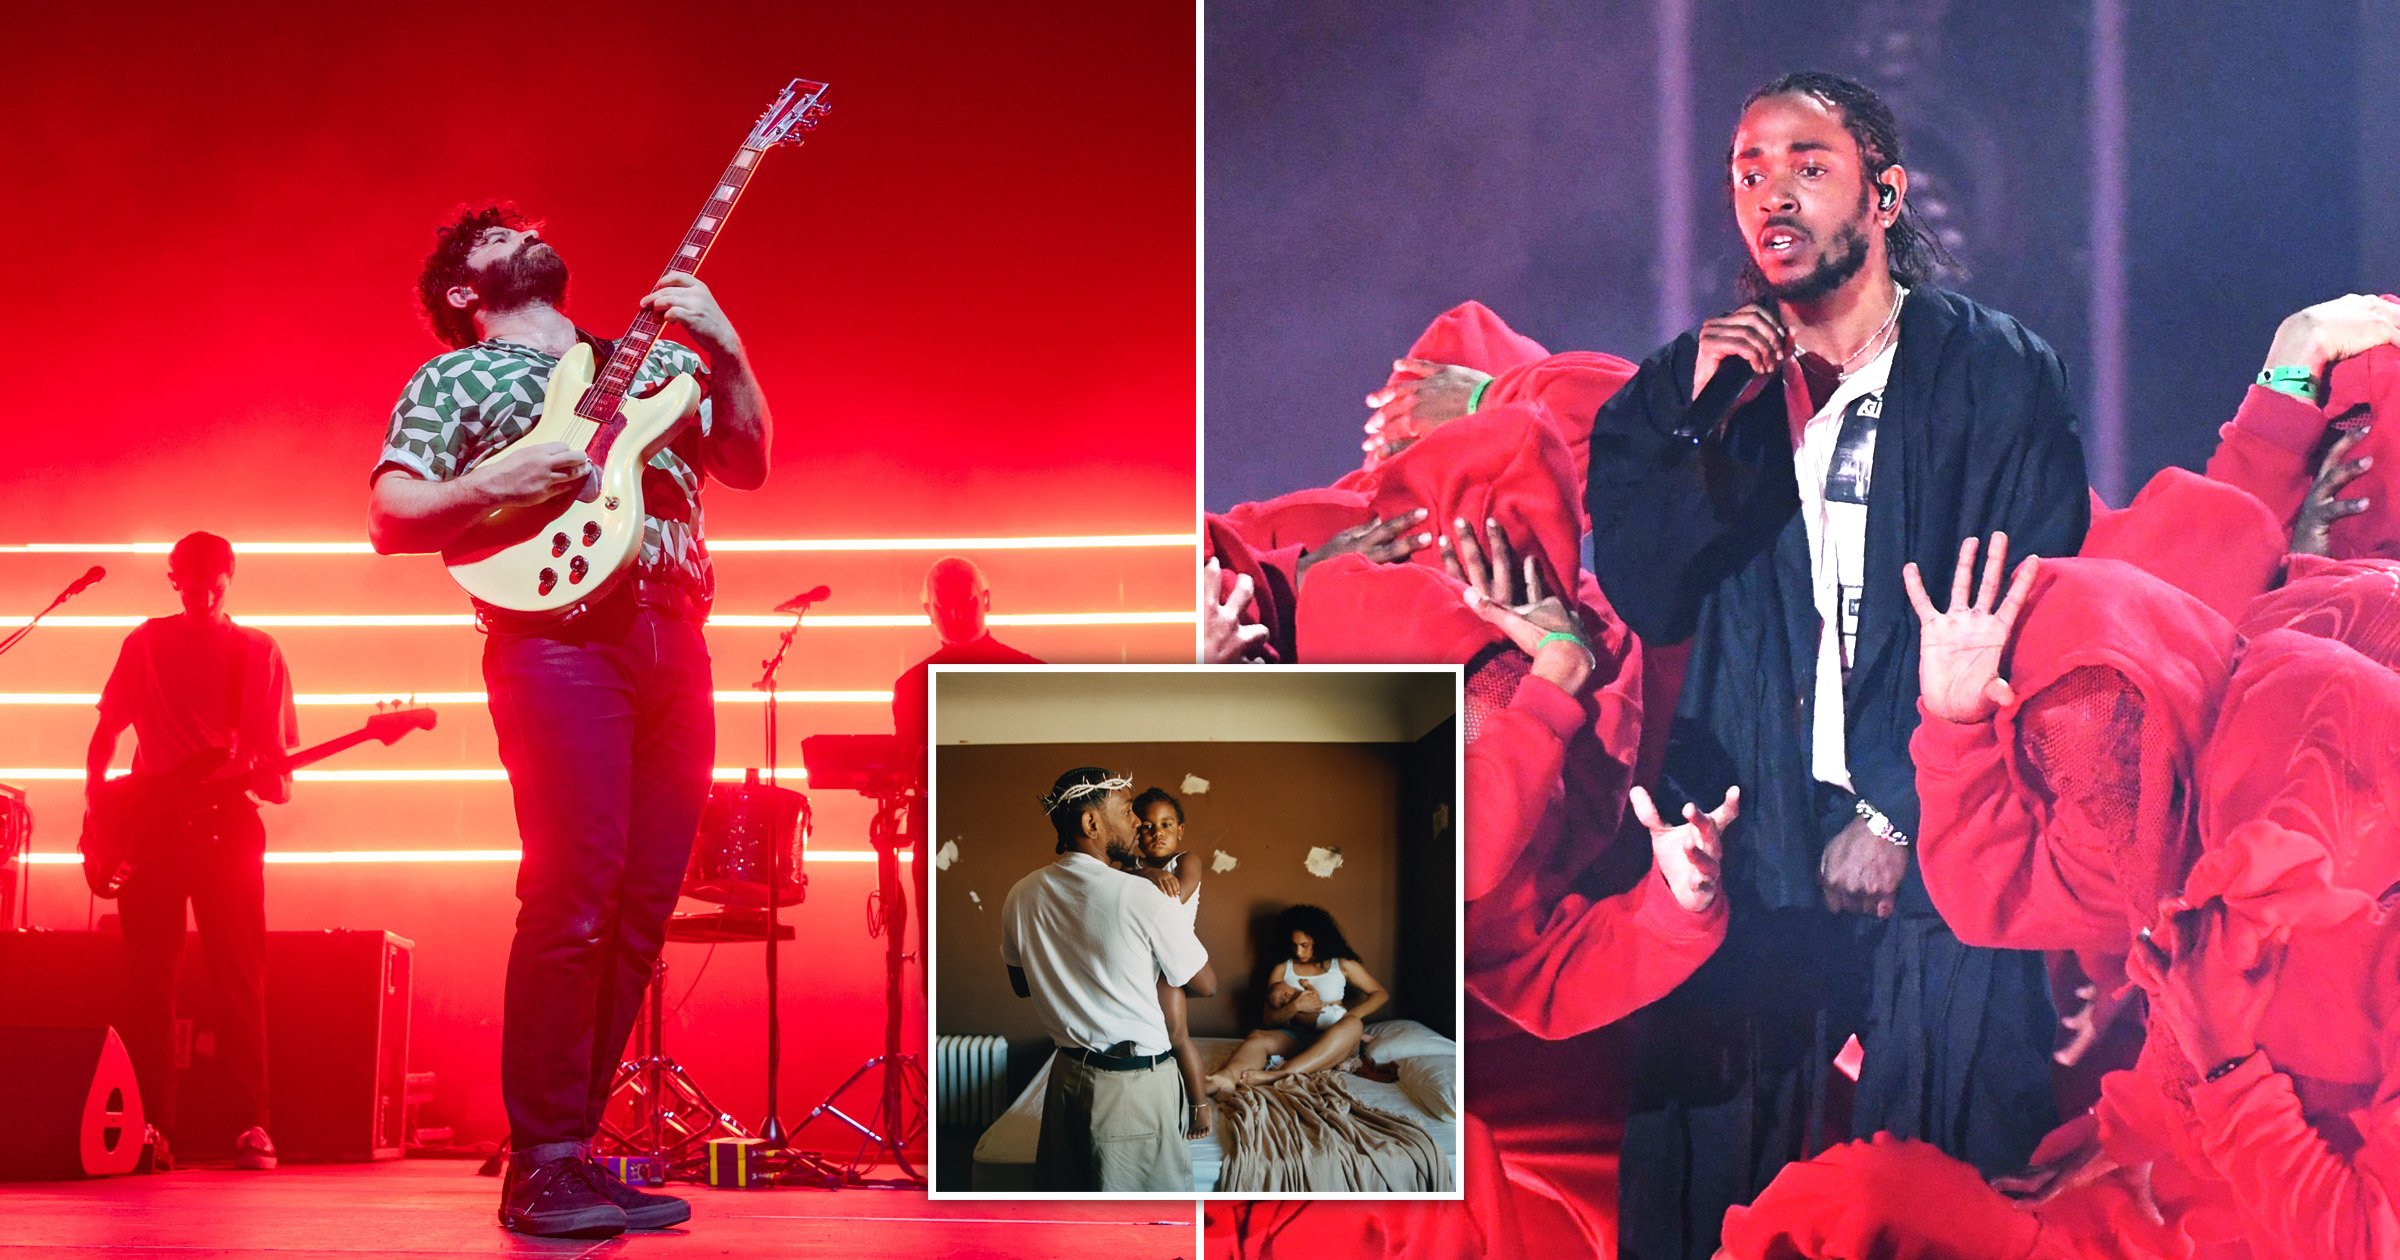 Foals call for Kendrick Lamar collaboration and we need this to happen: ‘He’s the best’ (metro.co.uk)